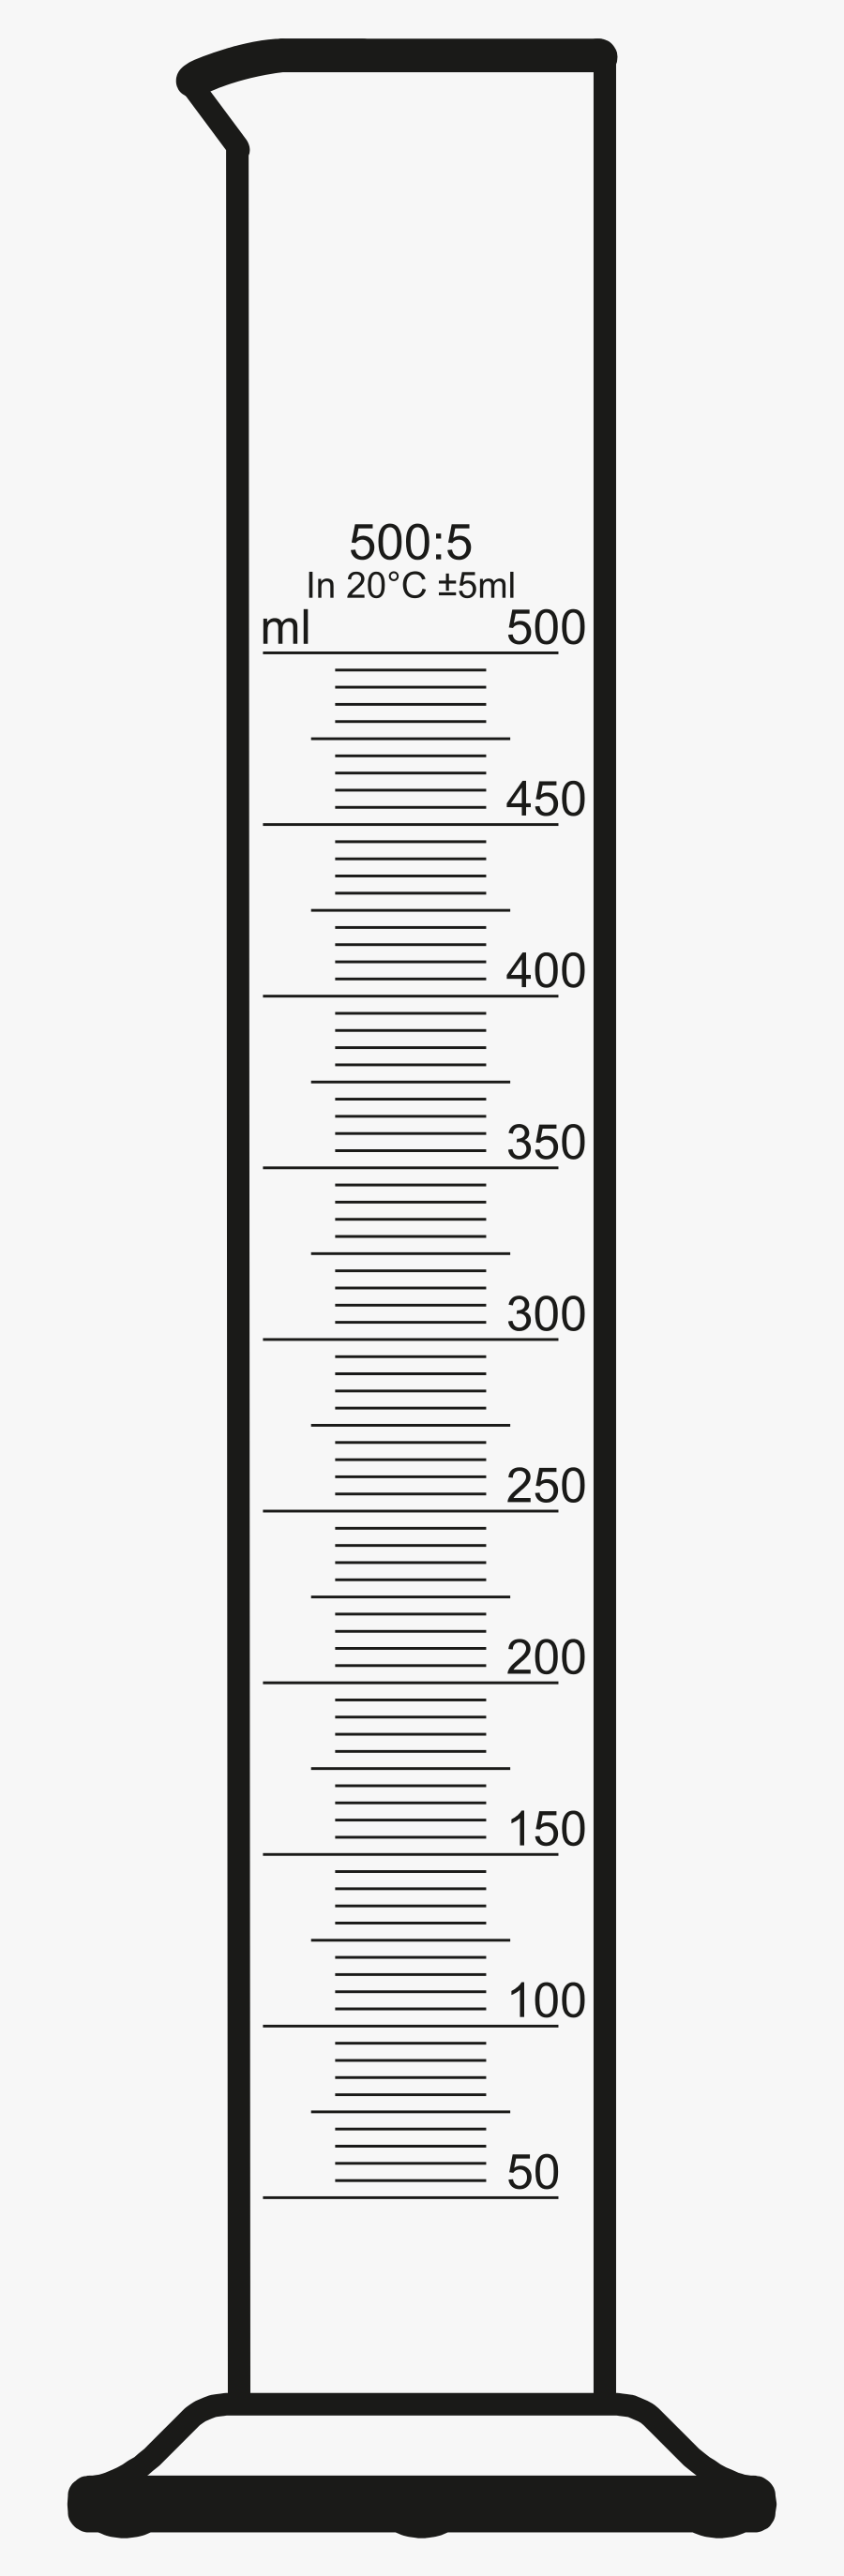 Clipart 533187 Graduated Cylinder Images Cow - 500 Ml Graduated Cylinder Drawing, Transparent Clipart